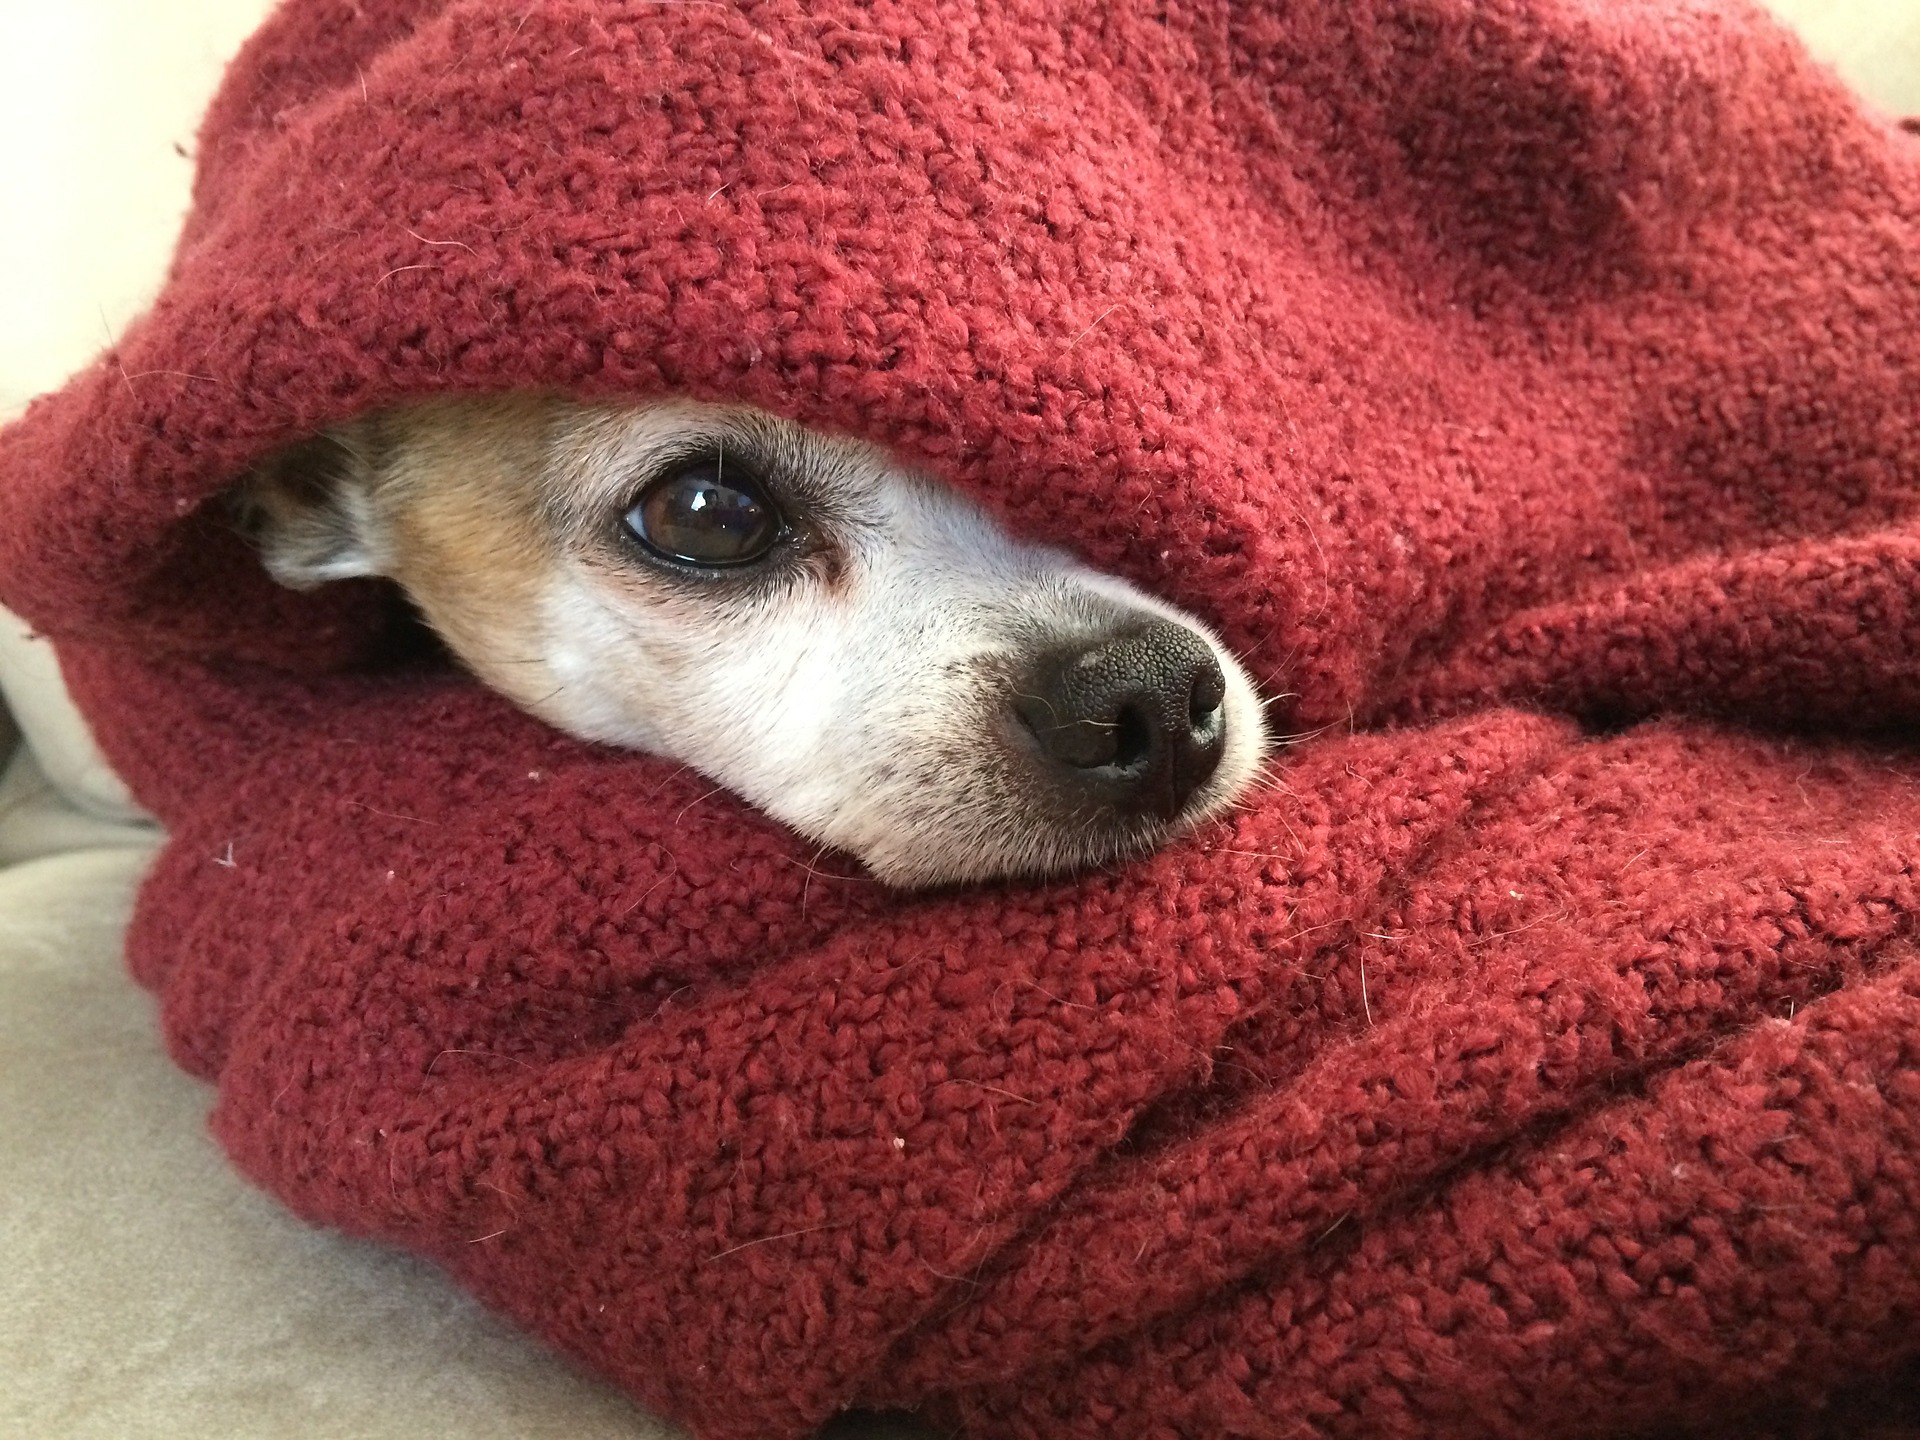 dog teeth chattering - chihuahua in blanket